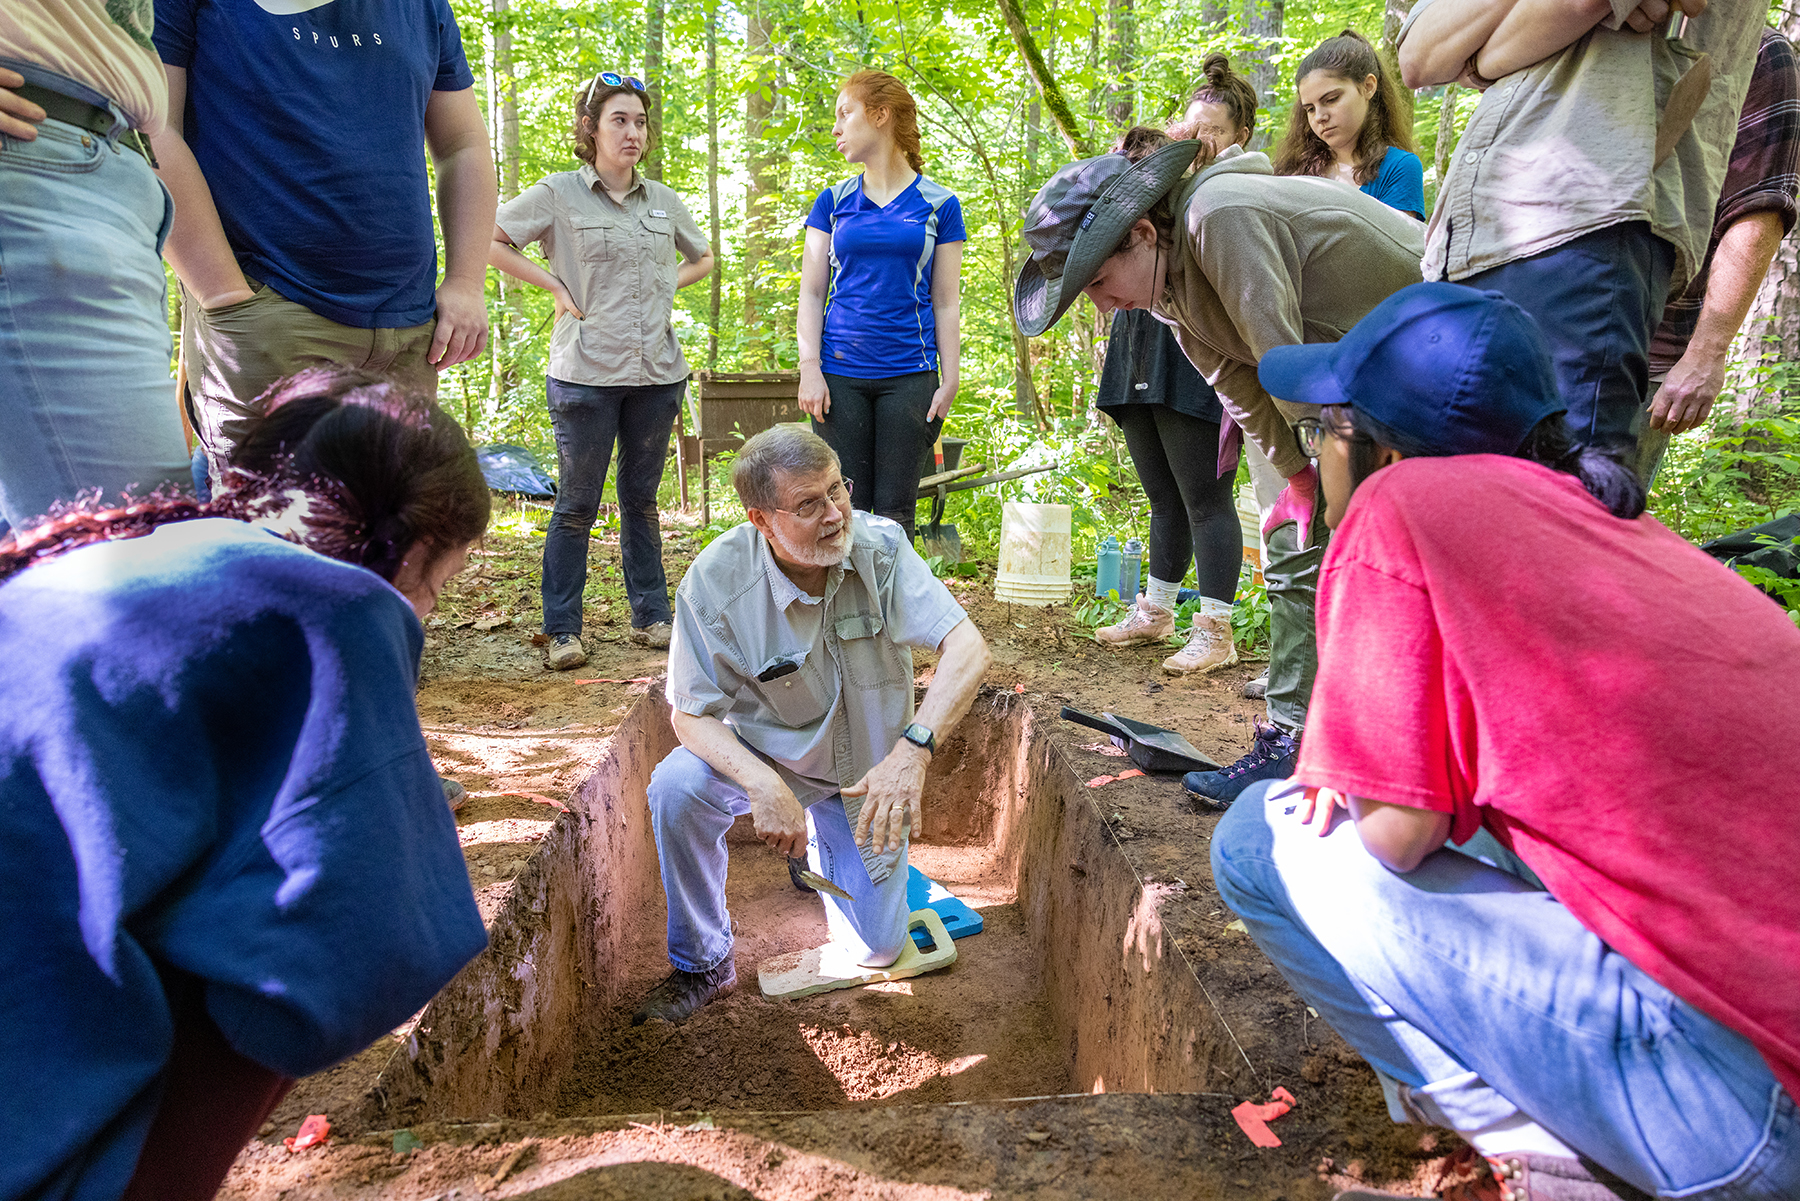 An archaeology professor stands in a hand dug pit, talking to students as the crowd around him.